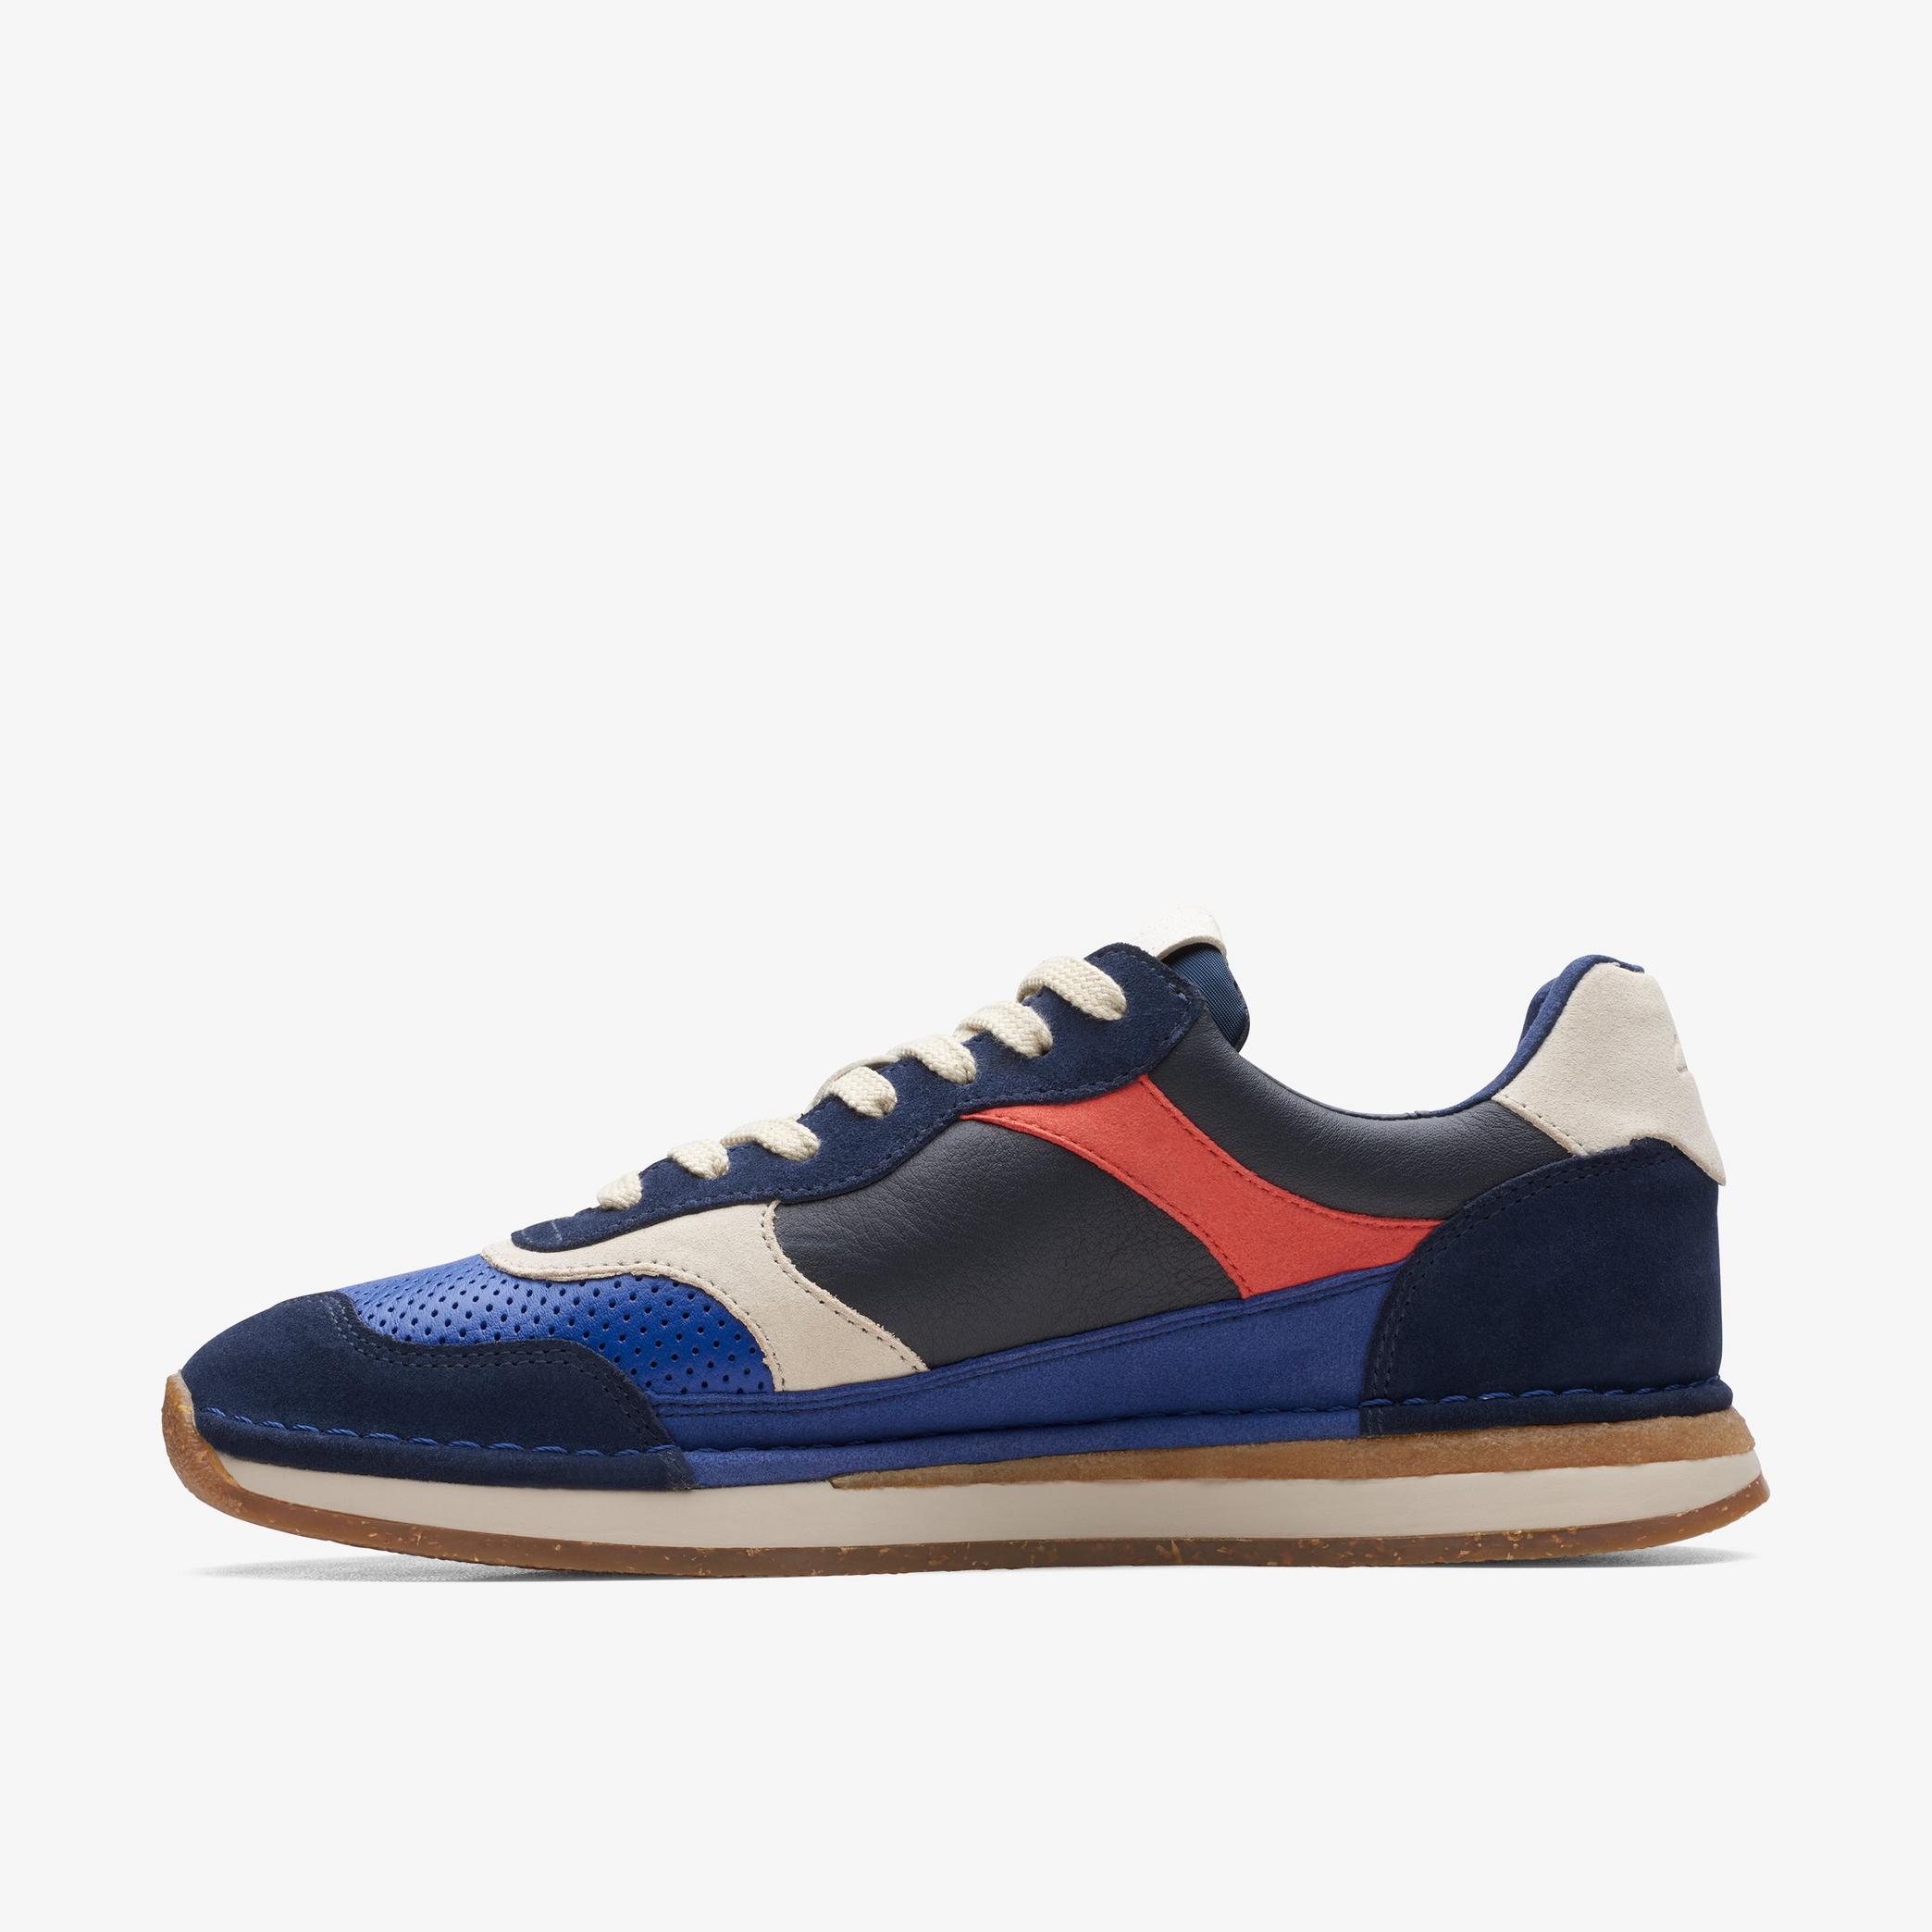 MENS Craft Run Tor Navy Trainers | Clarks Outlet